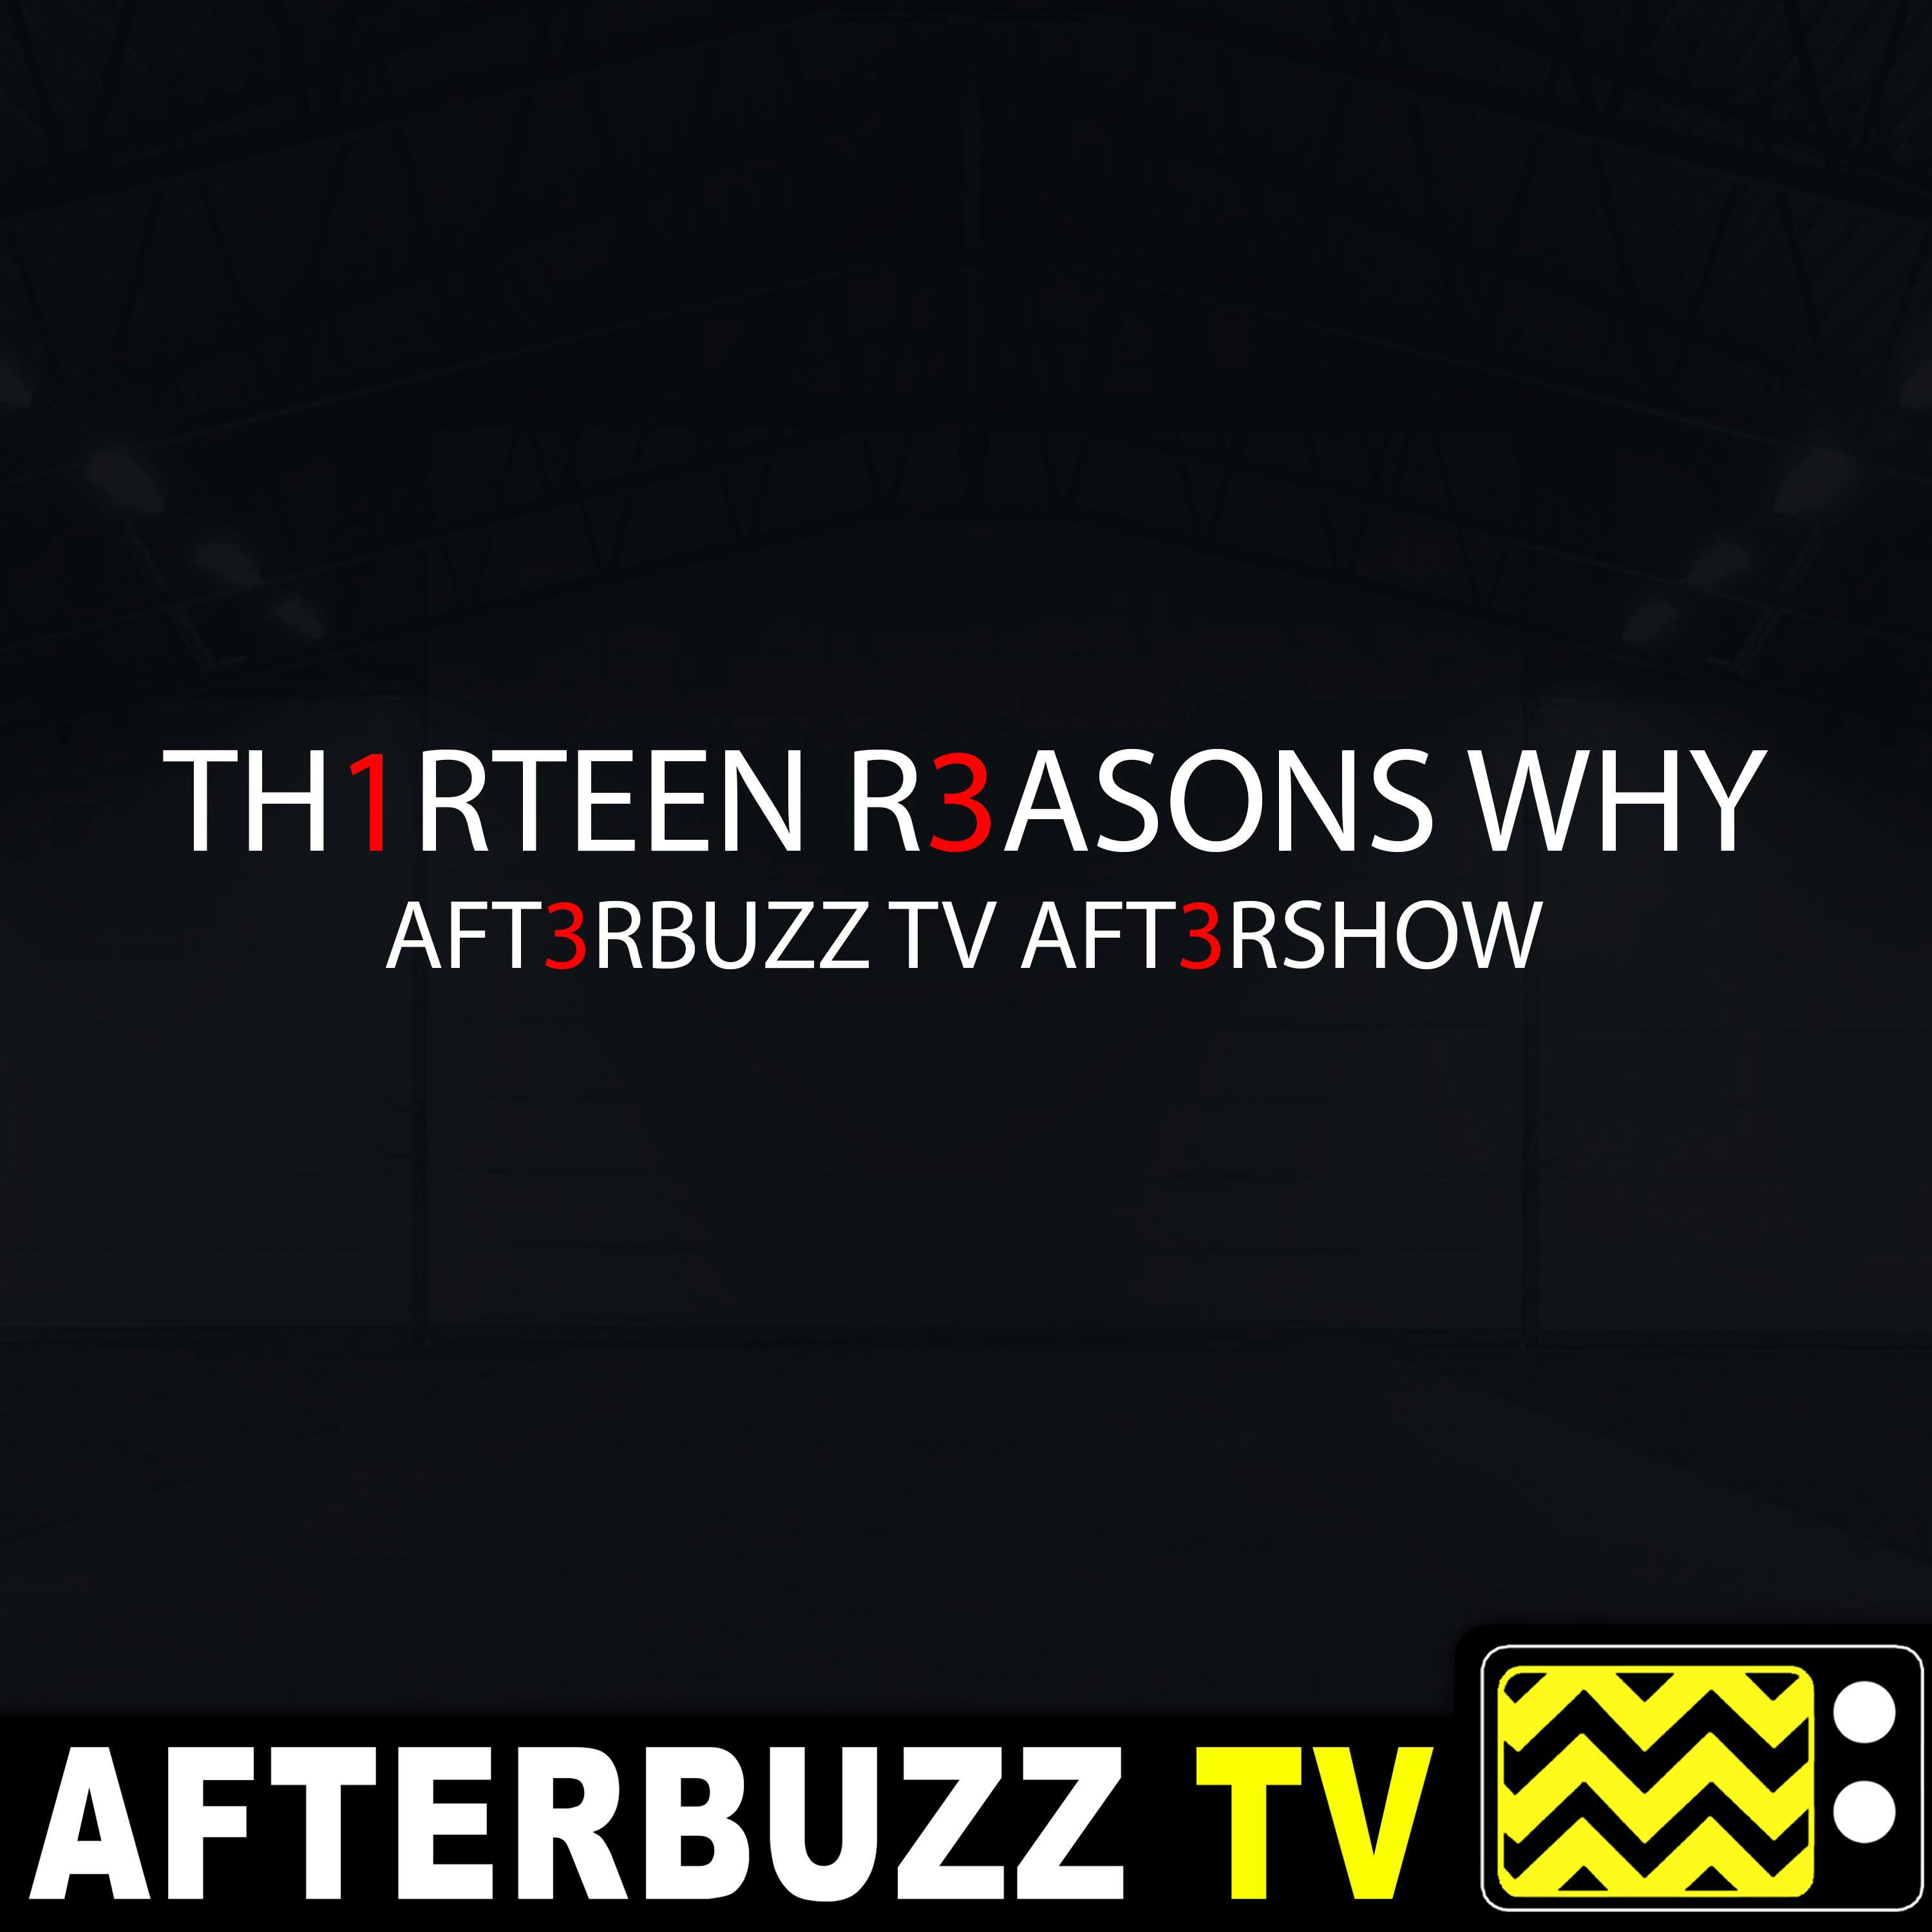 ”The Good Person is Indistinguishable From the Bad” Season 3 Episode 3 ’13 Reasons Why’ Review